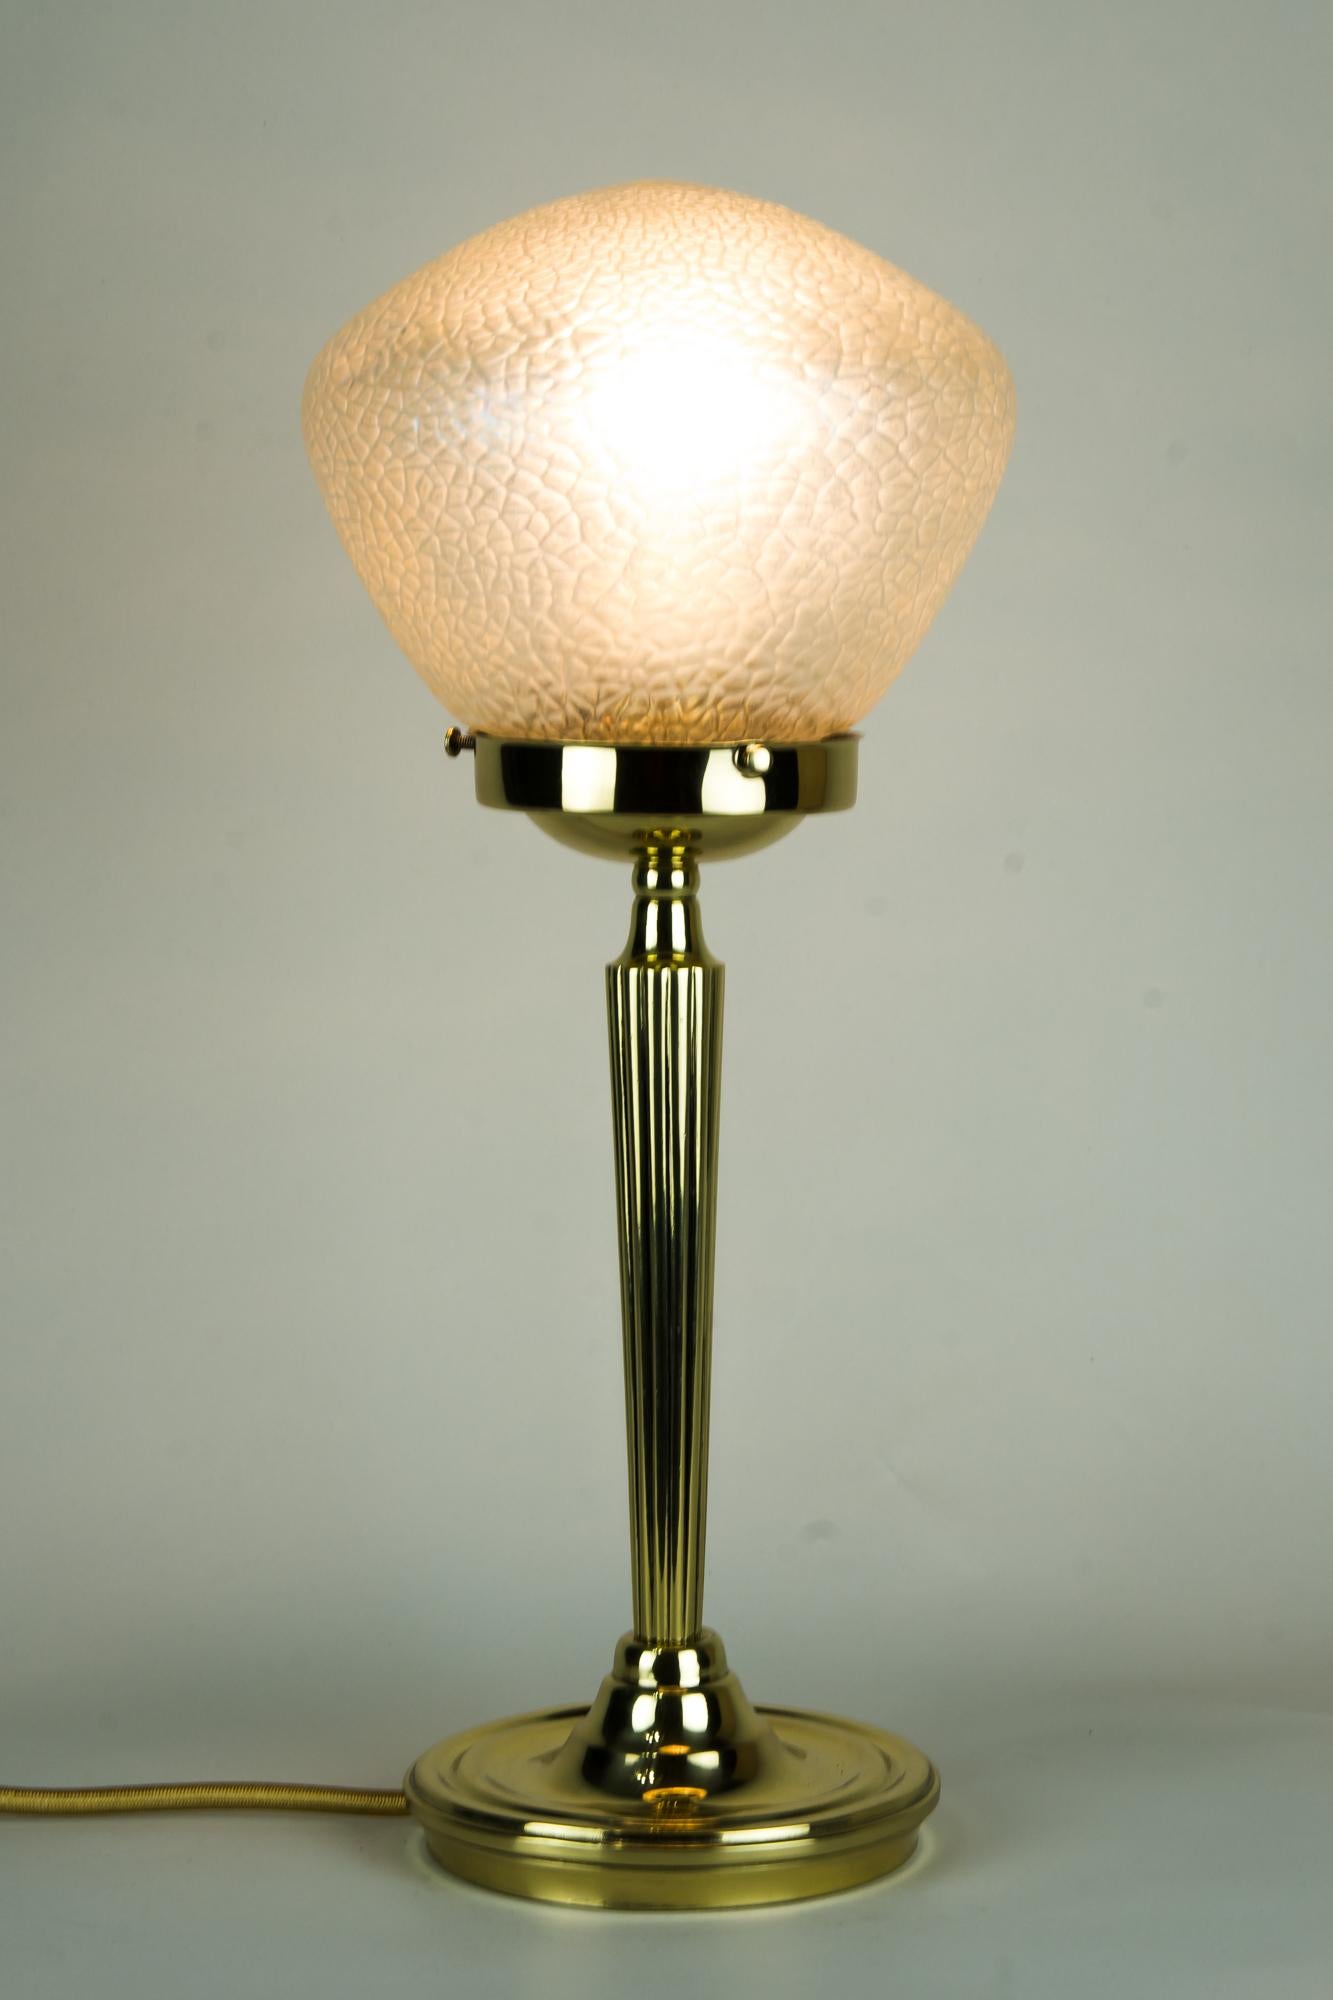 Art Deco table lamp with original glass shade, Vienna, circa 1920s
Polished and stove enameled.